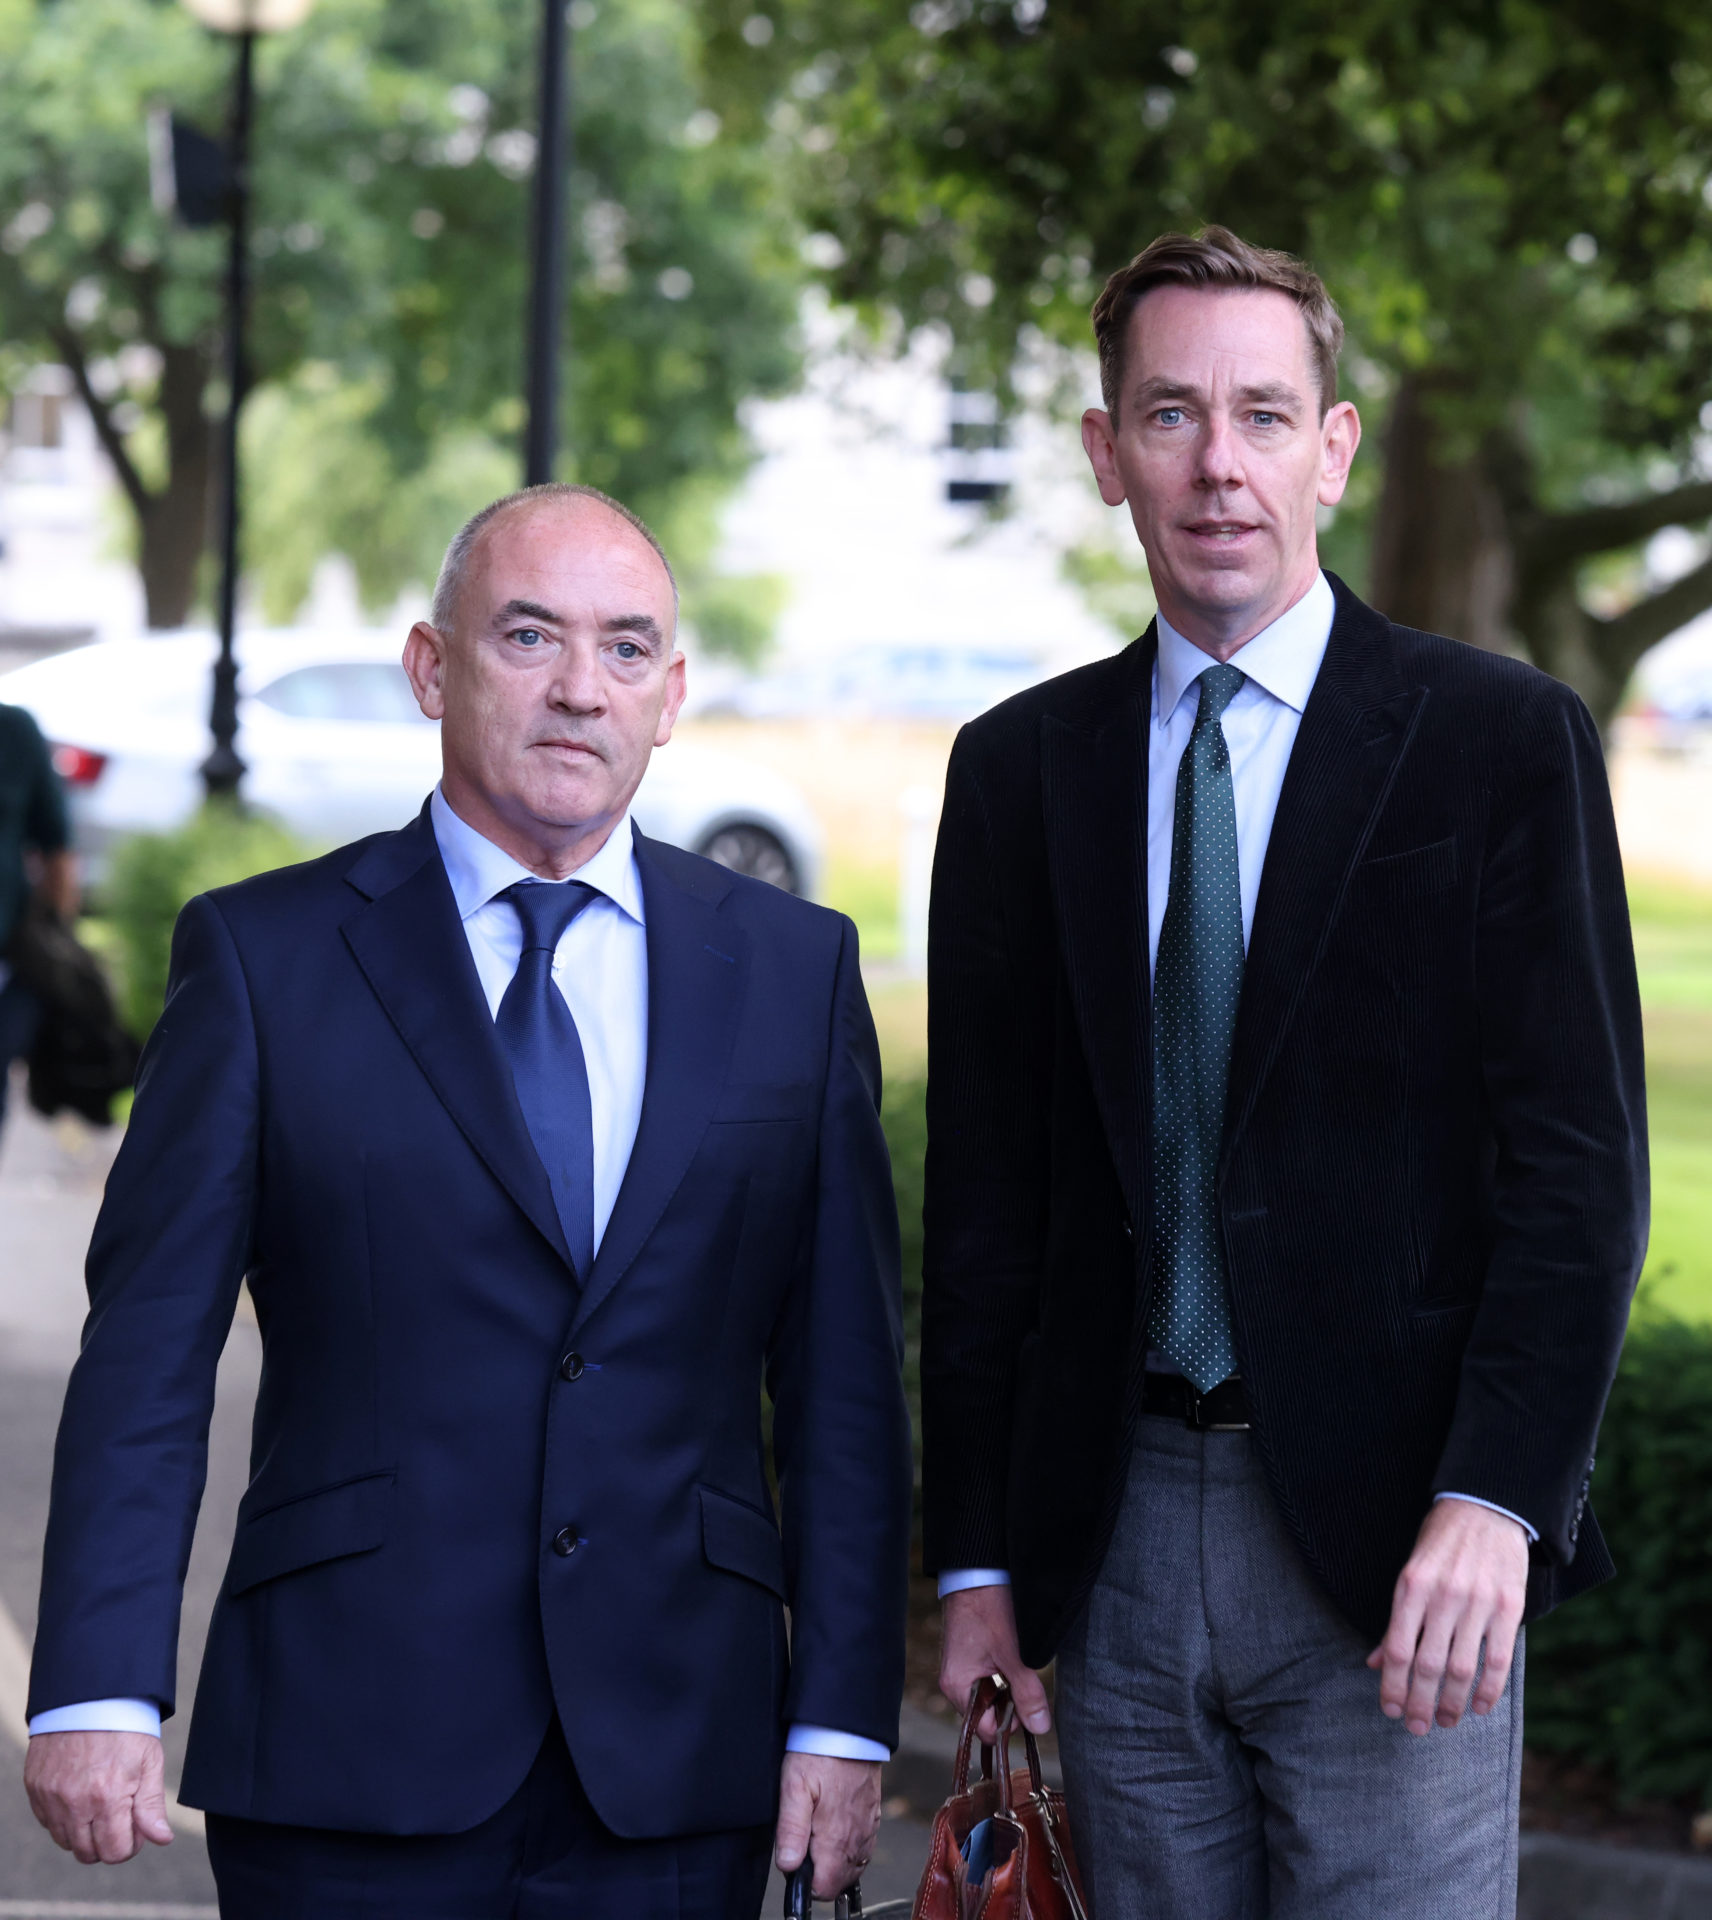  RTE Radio Presenter Ryan Tubridy leaving at the Dail (Leinster House) with his agent Noel Kelly after giving evidence at the Public Accounts committee in the morning and the media Committee in the afternoon in relation to his pay issues.